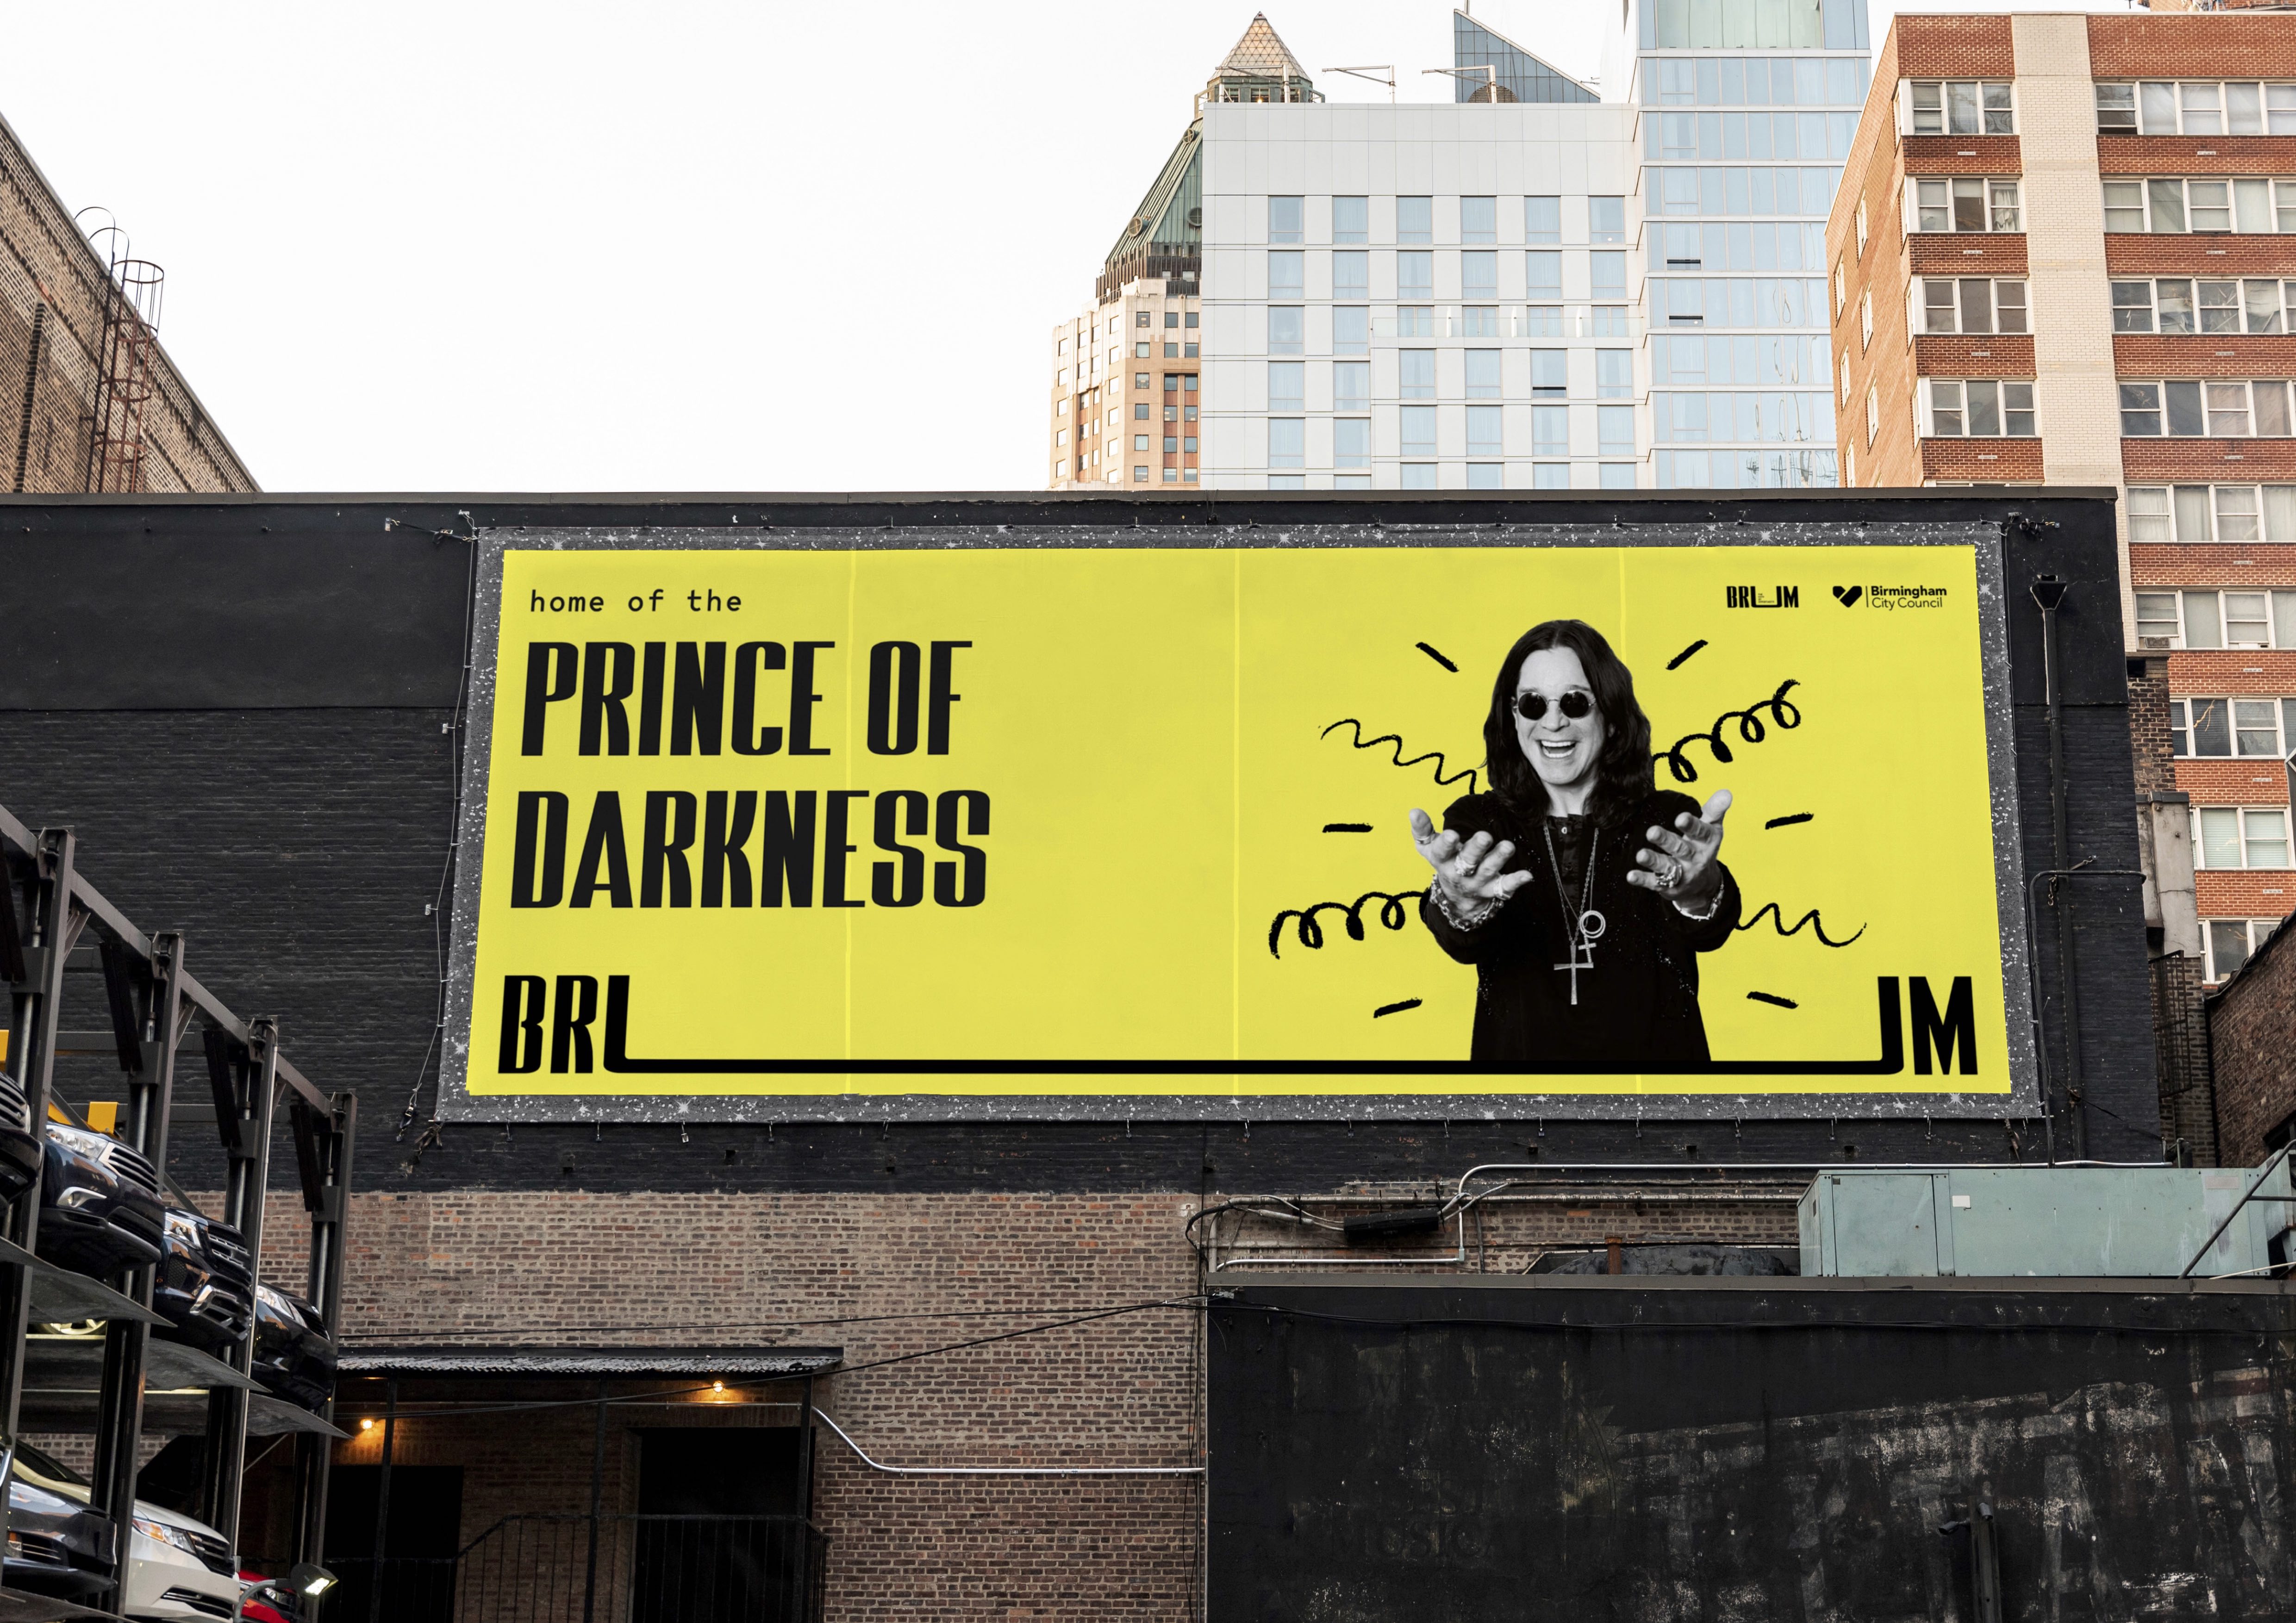 Birmingham billboard by Thea Reeder. The image shows a bold yellow background with an image of Ozzy Osborne. The copy reads "Home of the Prince of Darkness".